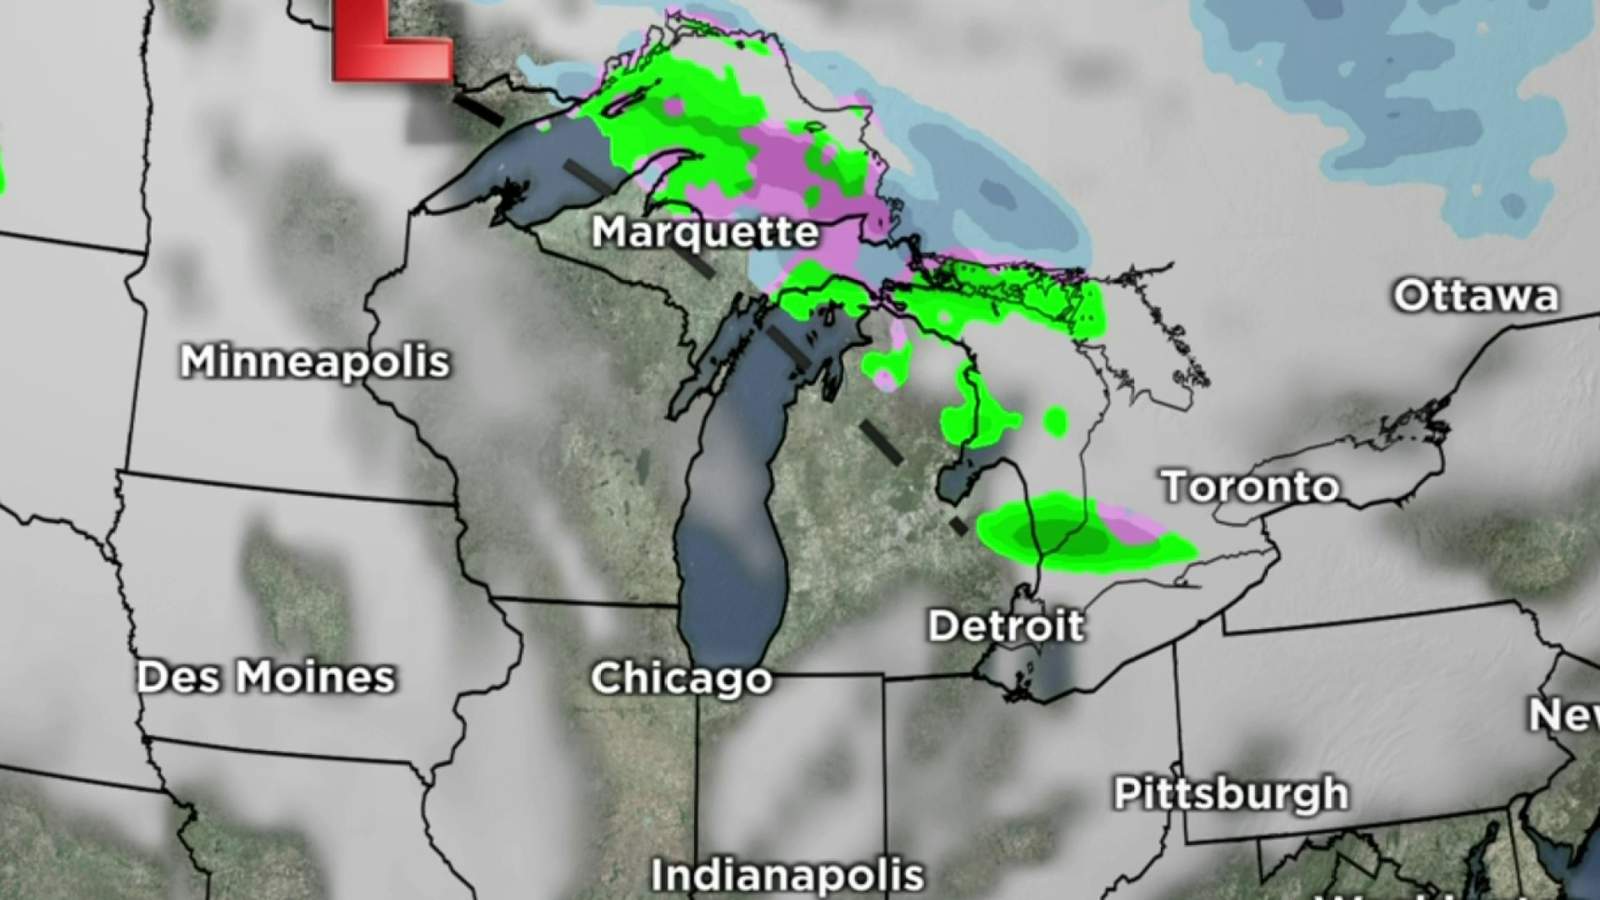 Metro Detroit weather: Cold, mostly cloudy but dry Sunday night